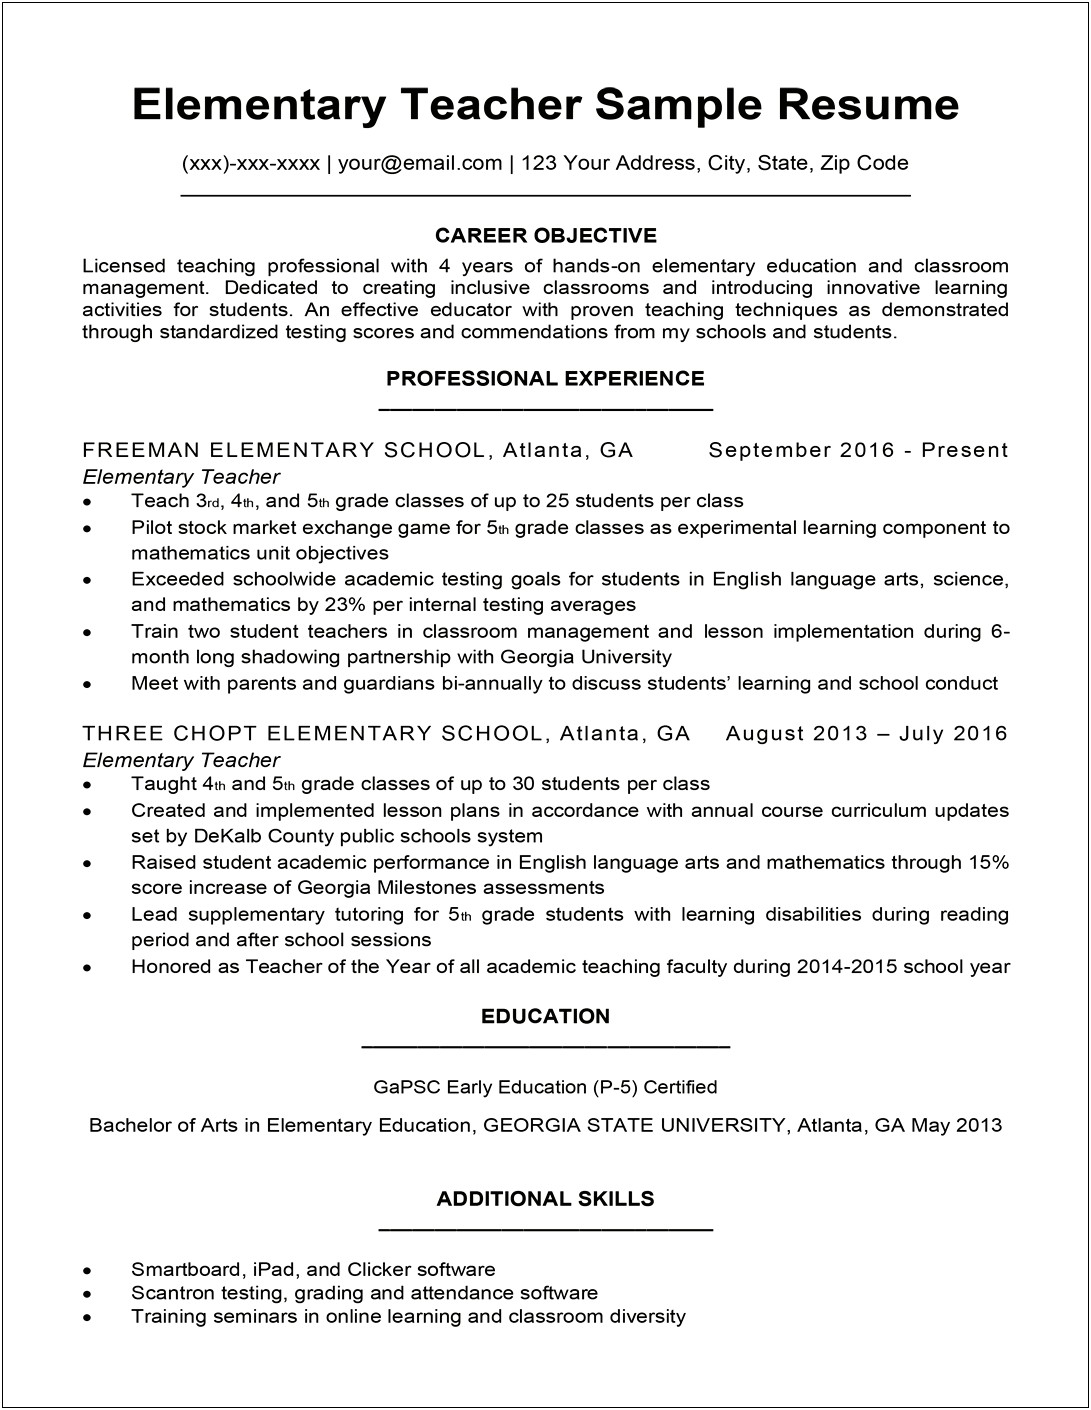 Free Sample Resume For Teachers With Experience